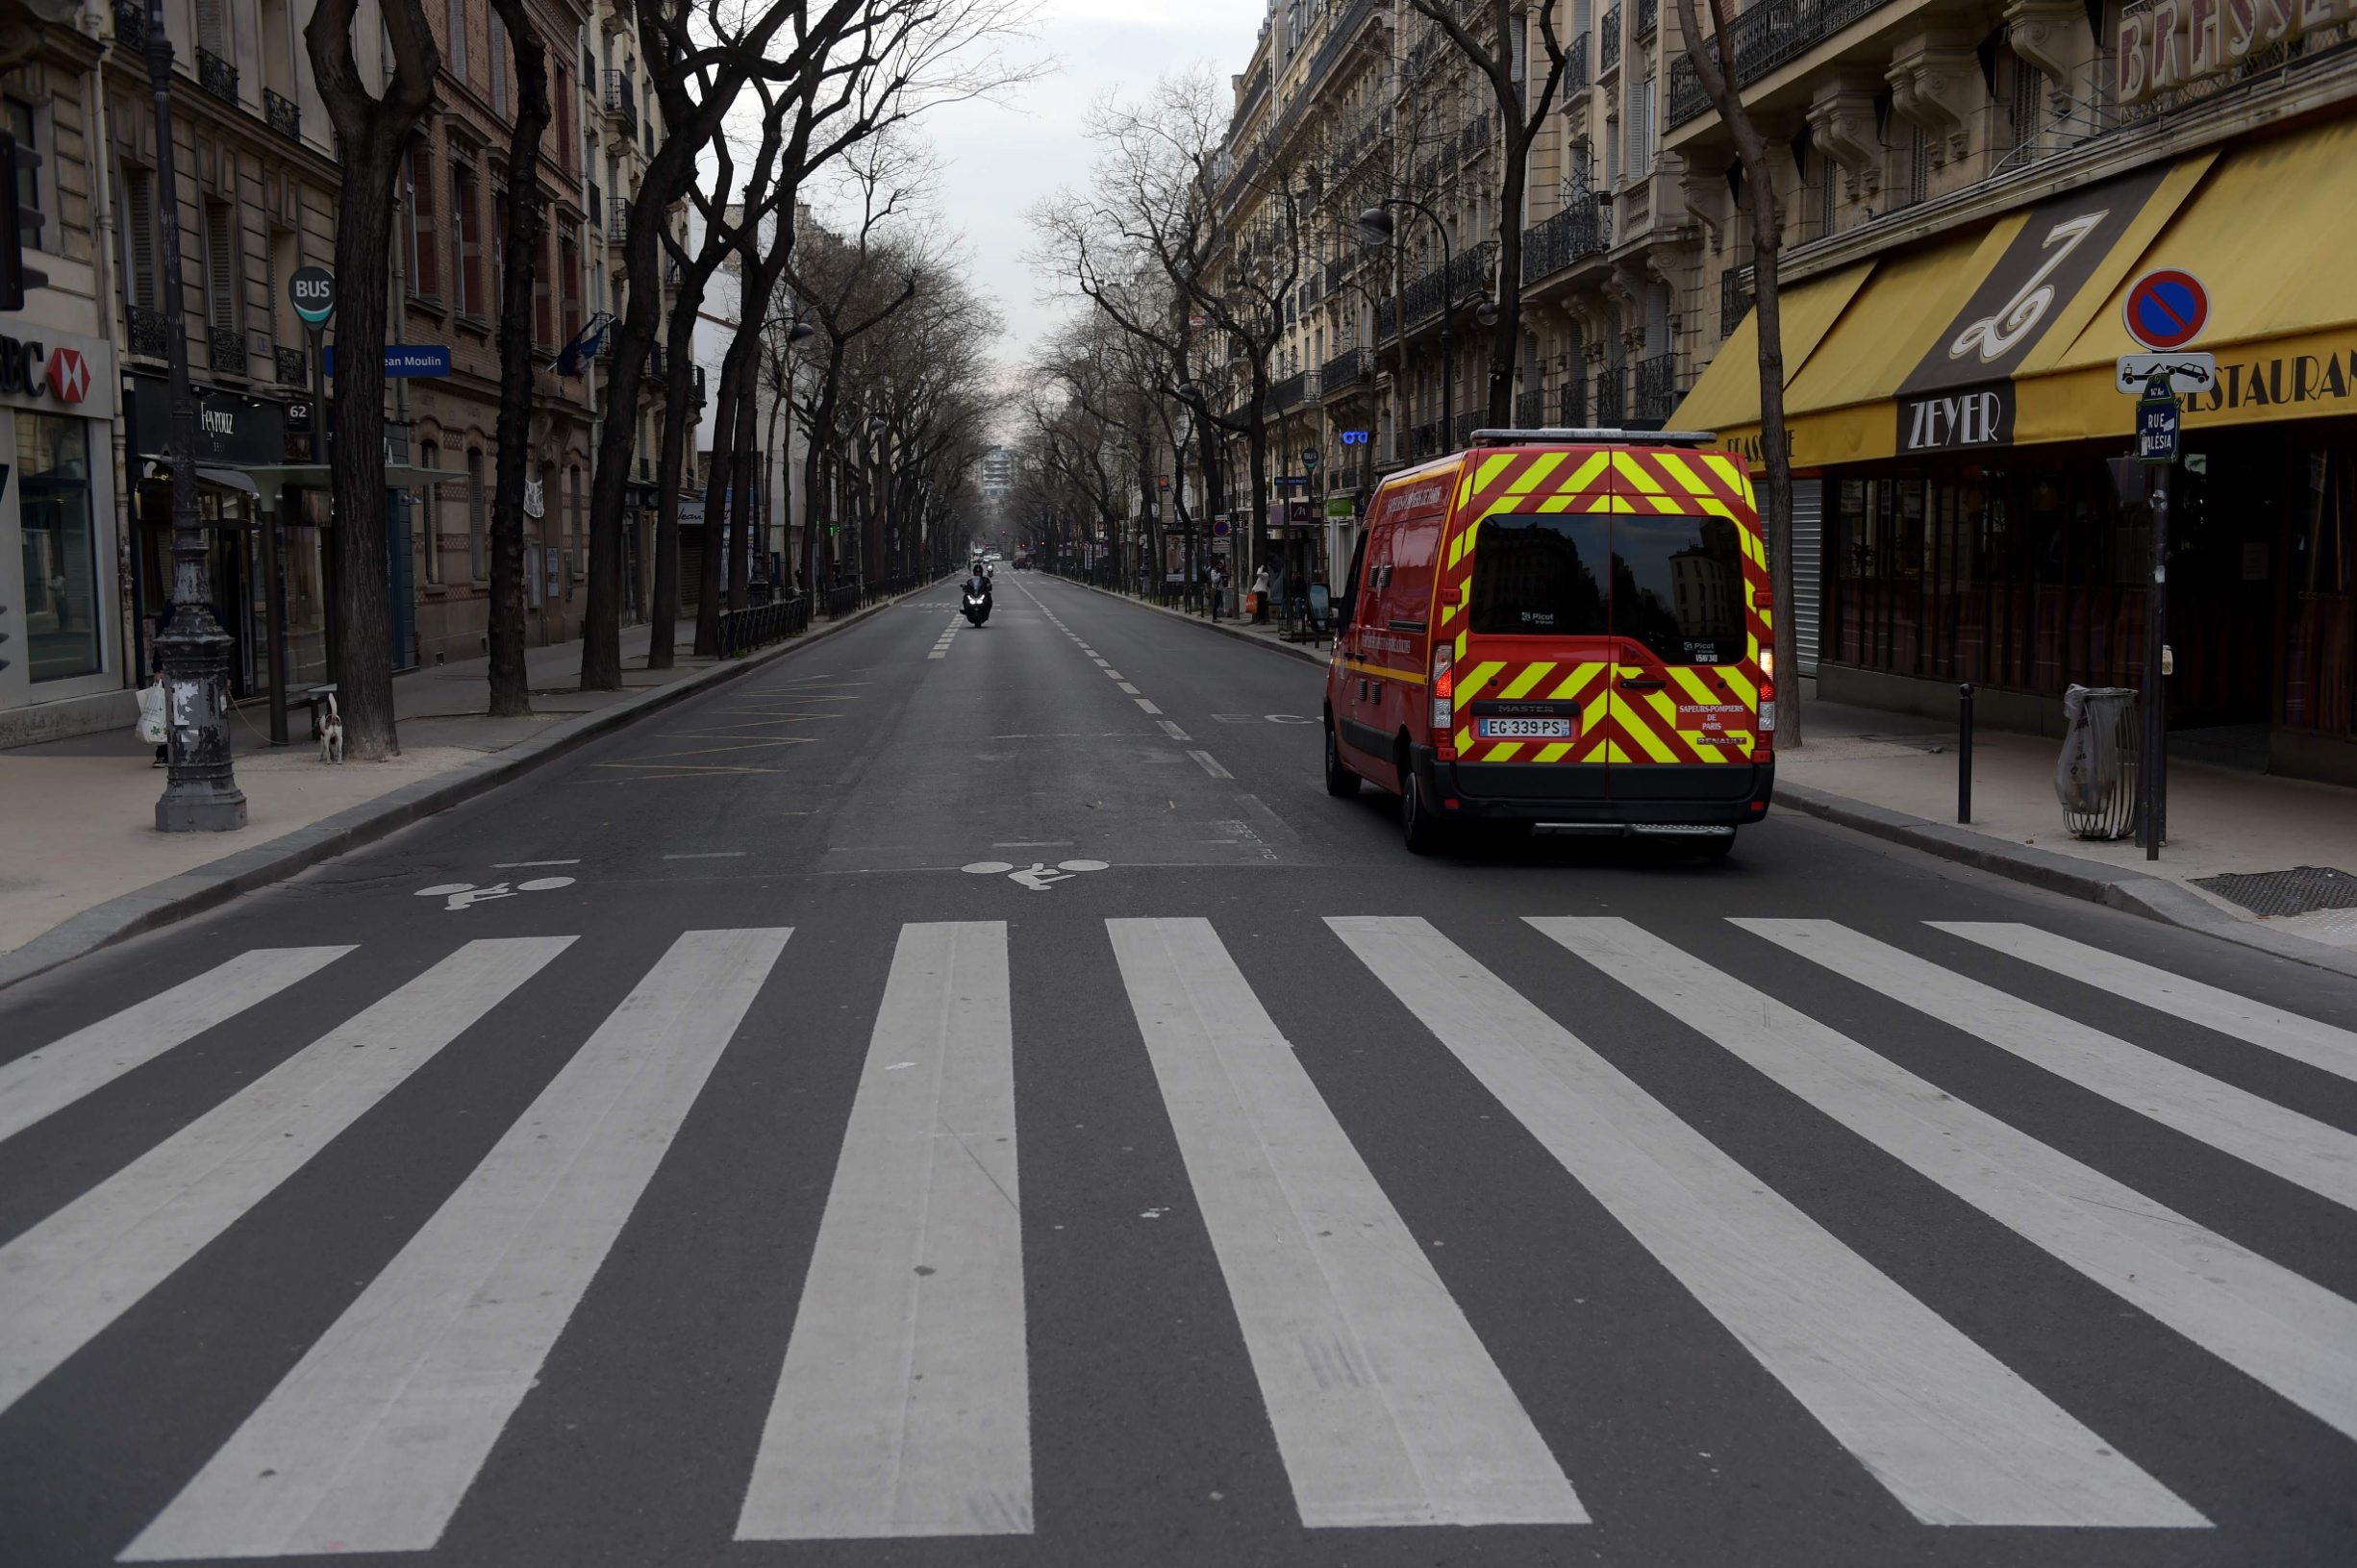 A picture taken on March 17, 2020 shows the empty rue d'Alesia in Paris as a strict lockdown comes into in effect in France to stop the spread of COVID-19, caused by the novel coronavirus. - A strict lockdown requiring most people in France to remain at home came into effect at midday on March 17, 2020, prohibiting all but essential outings in a bid to curb the coronavirus spread. The government has said tens of thousands of police will be patrolling streets and issuing fines of 38 to 135 euros (42-150 USD) for people without a written declaration justifying their reasons for being out. (Photo by ERIC PIERMONT / AFP)